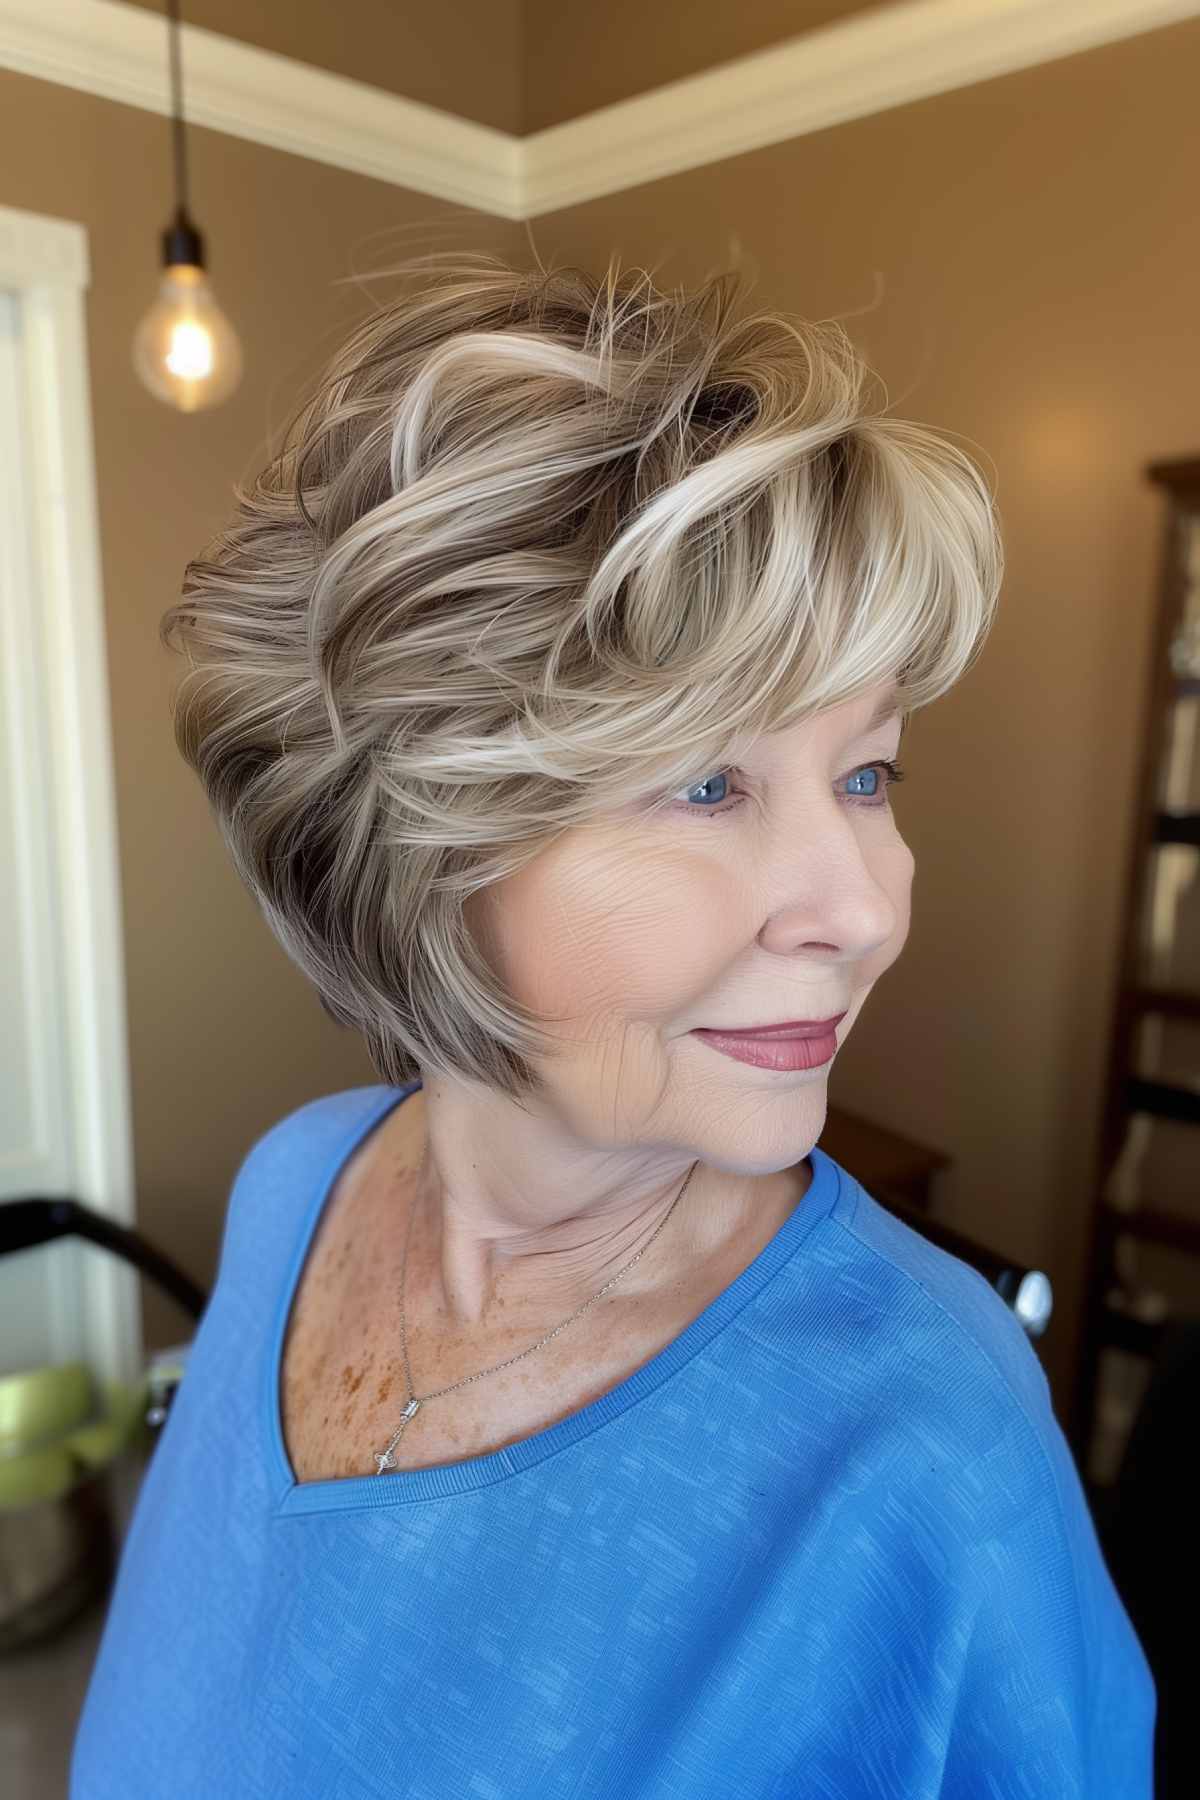 The woman sported a sleek, voluminous cut with feathery layers and honey blonde highlights.